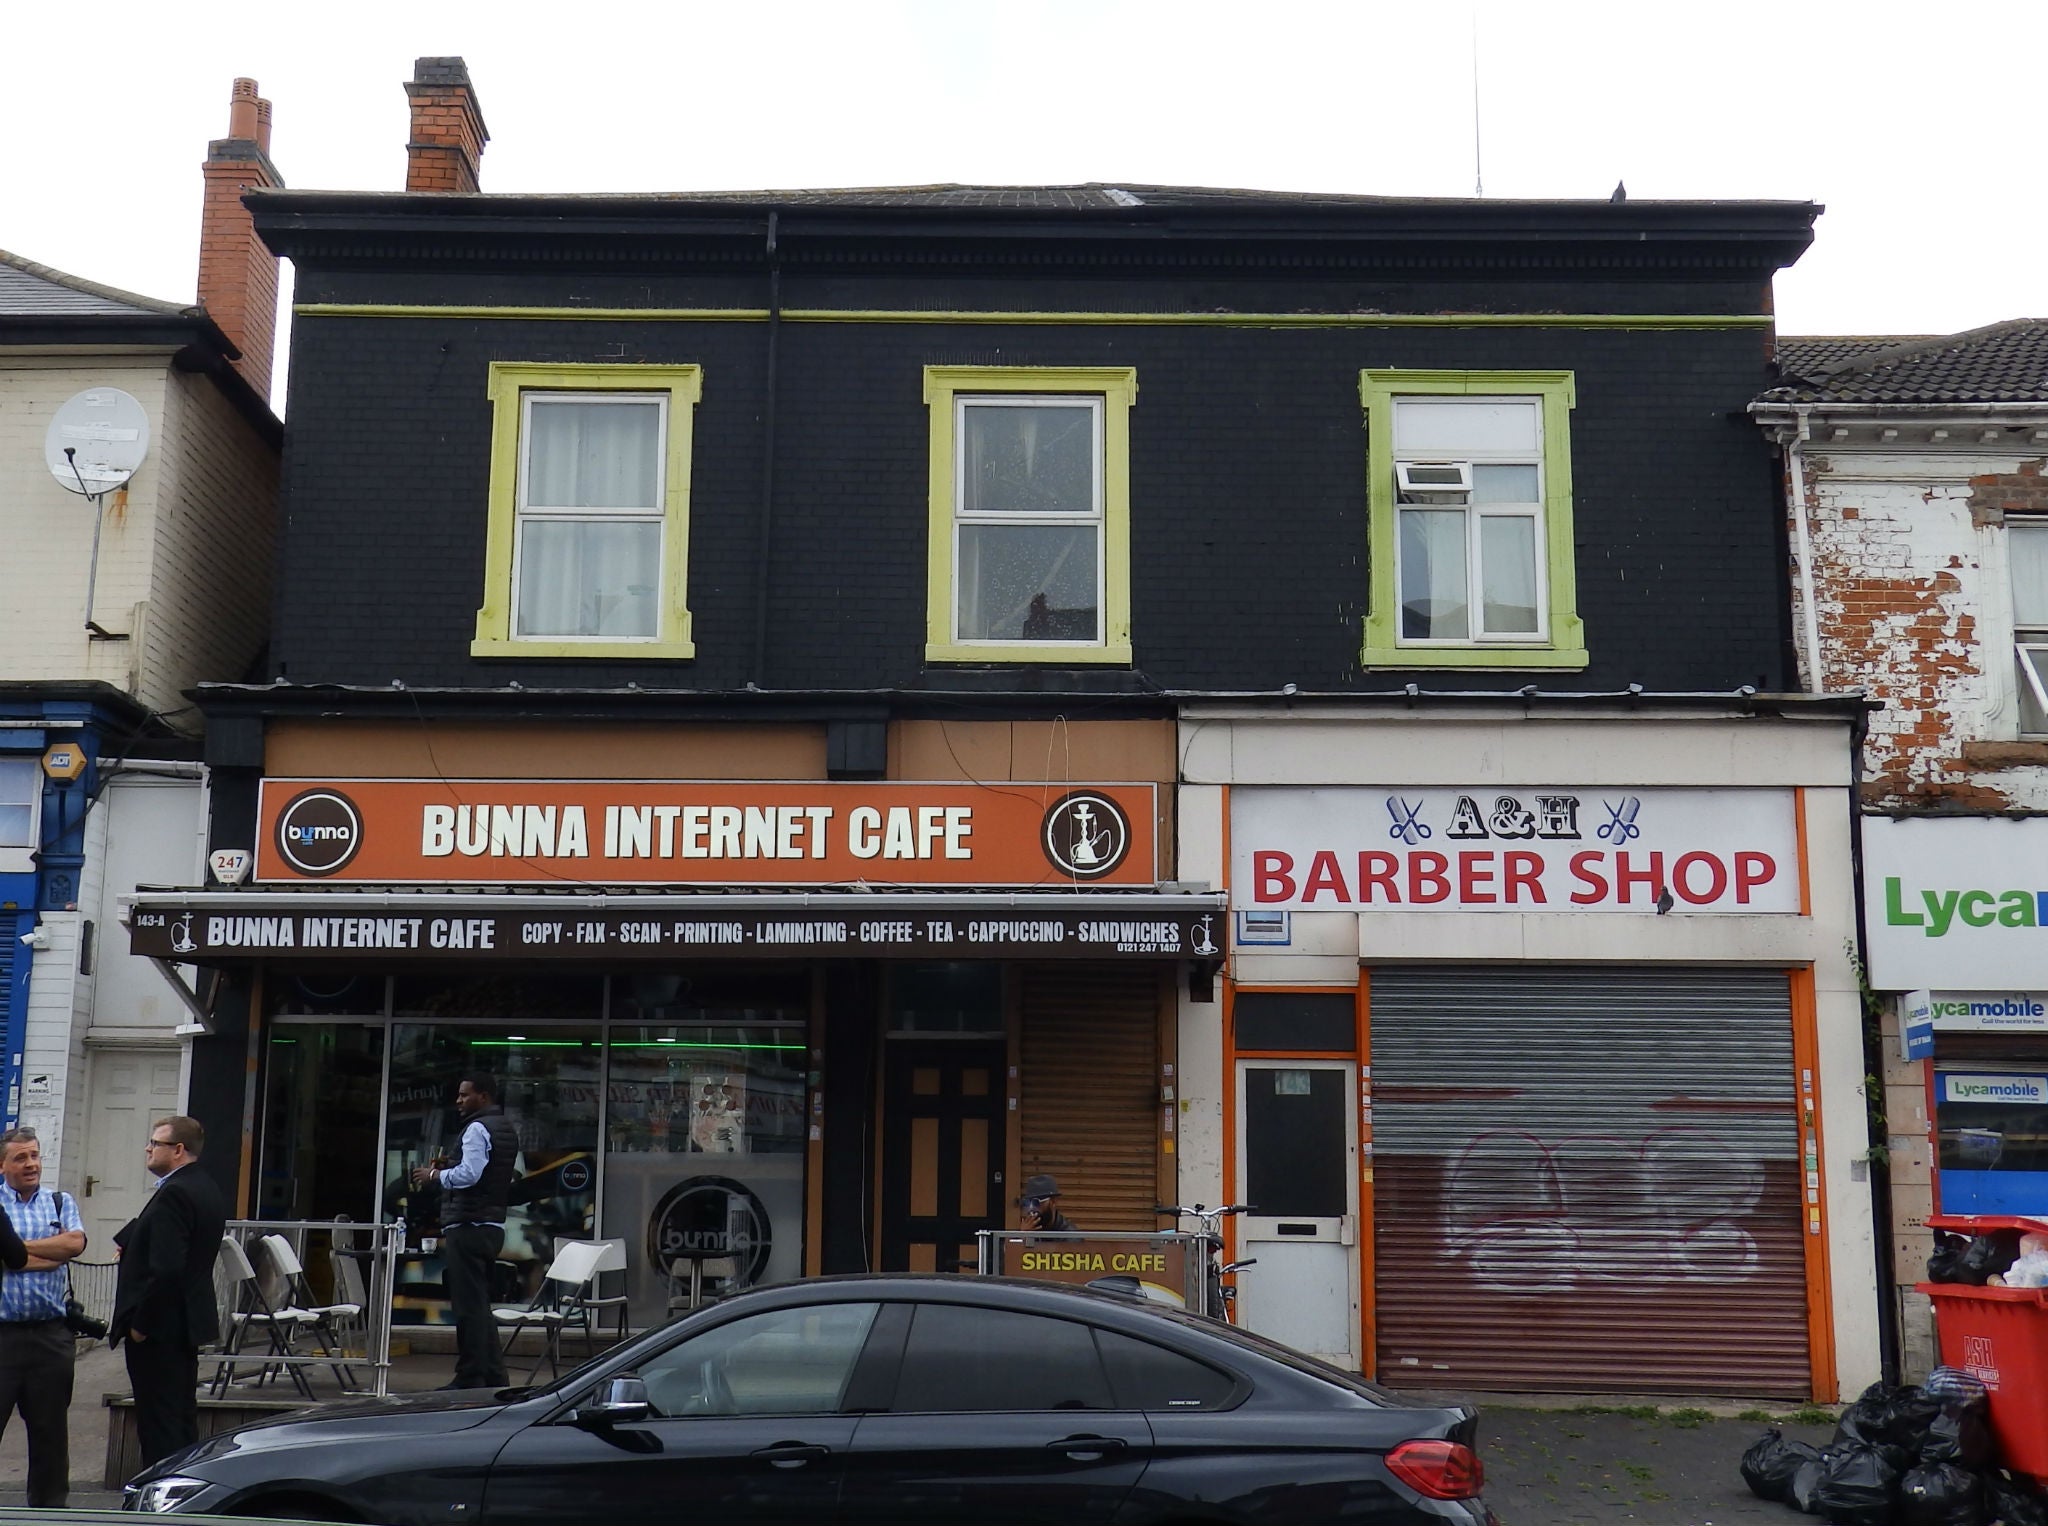 Police searched a flat above an internet cafe and barbers’ shop in Sparkbrook, Birmingham